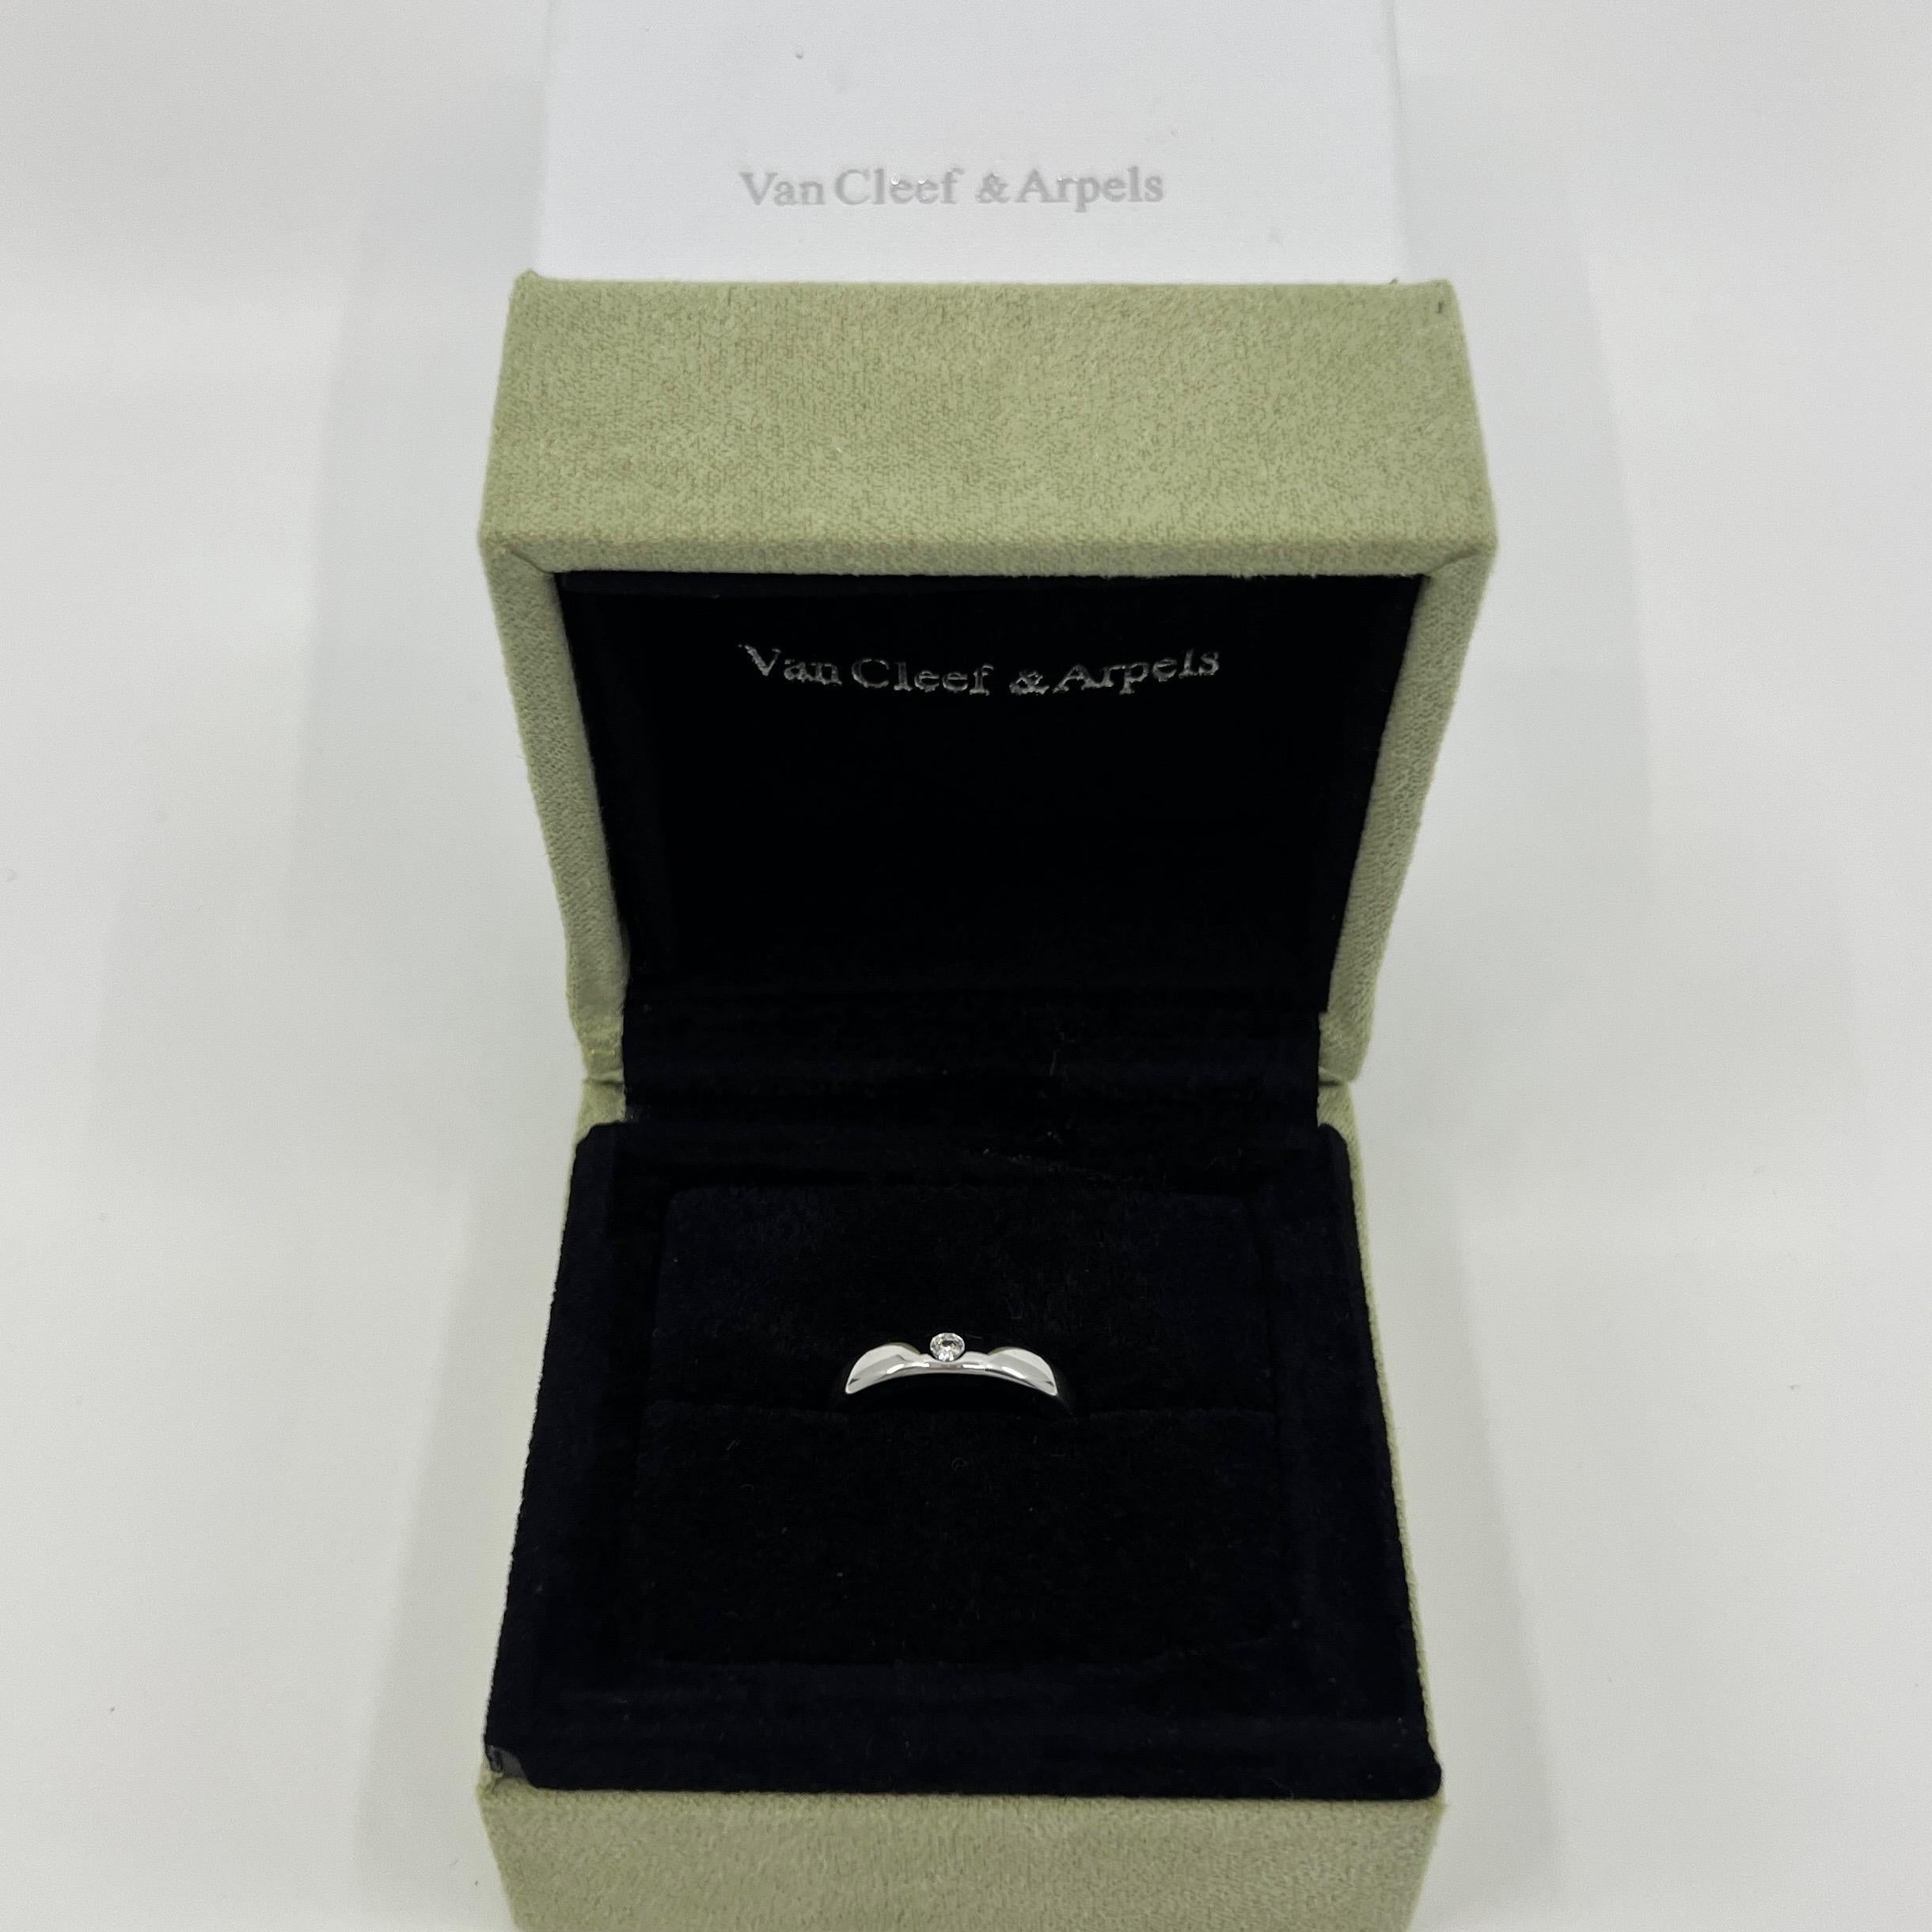 Van Cleef & Arpels New York Platinum Diamond Band Ring.

A classic band ring from VCA New York collection. Set with a single flush set 2.5mm round cut natural white diamond.
Fine jewellery houses like Van Cleef & Arpels only use the finest diamonds